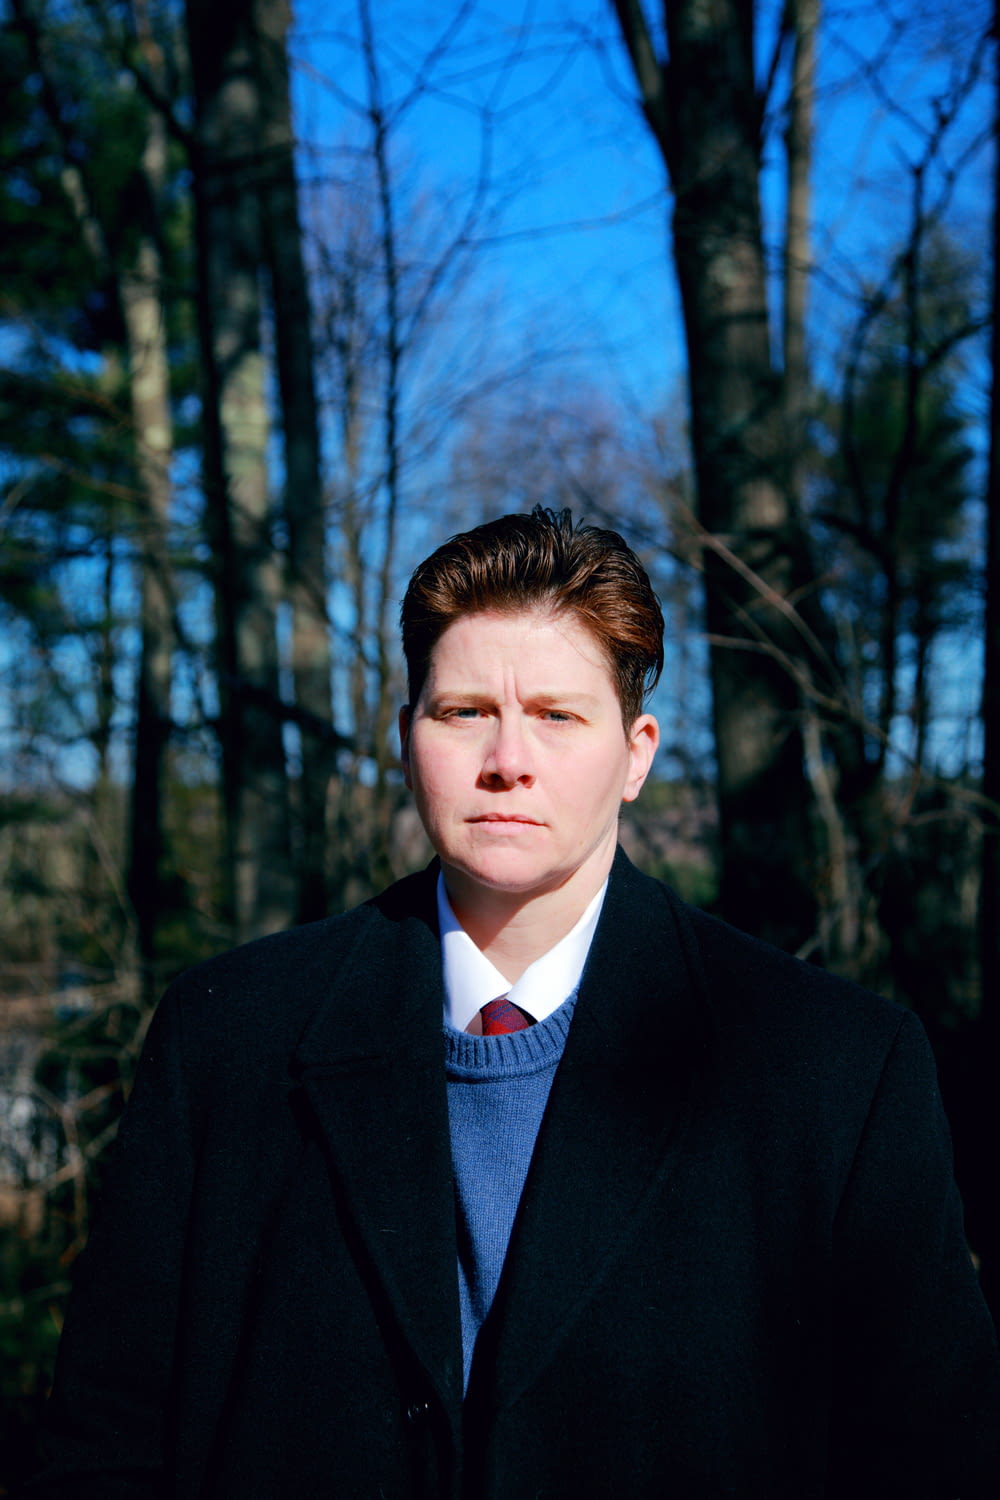 man in black suit jacket standing near trees during daytime